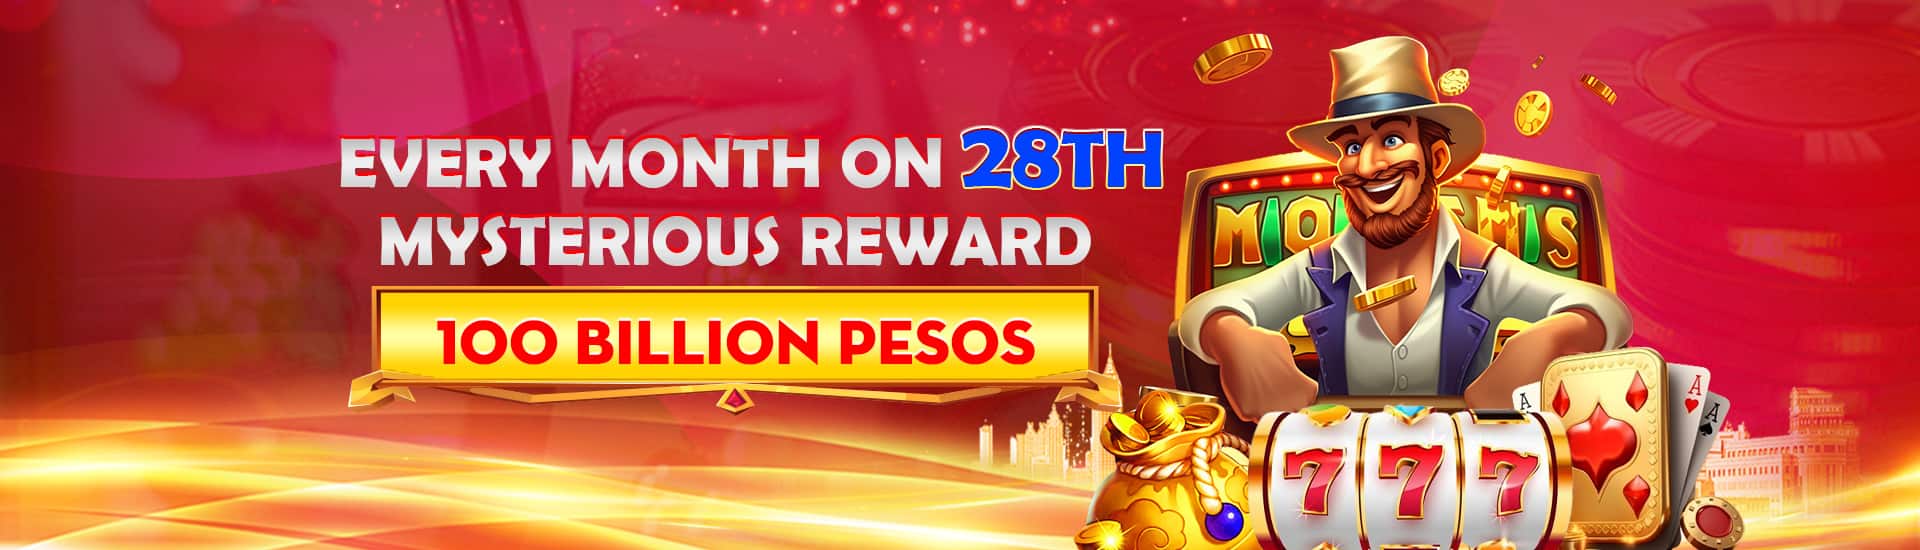 banner every month-on 28th mysterious reward